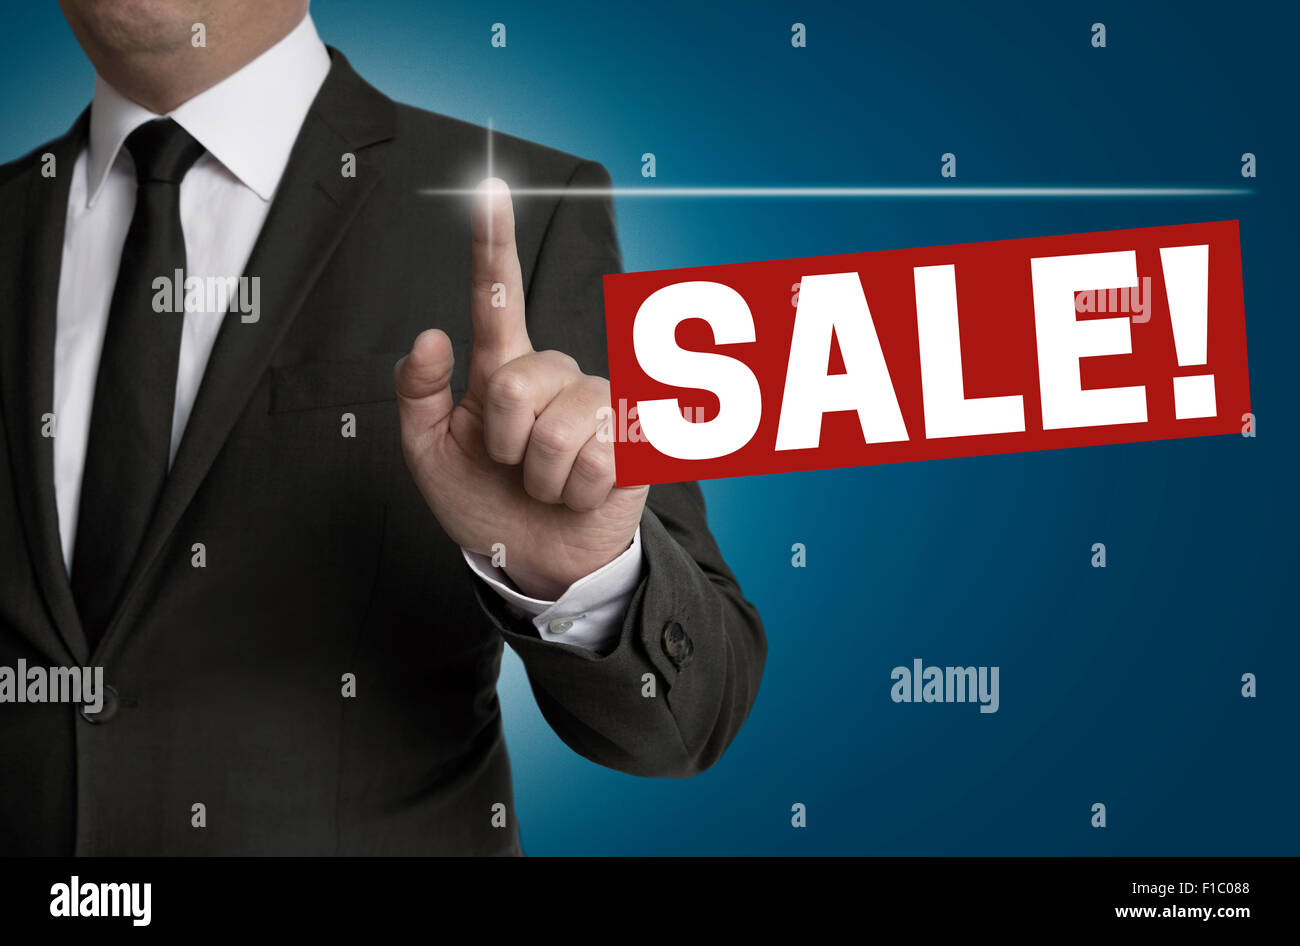 sale touchscreen is operated by businessman concept. Stock Photo